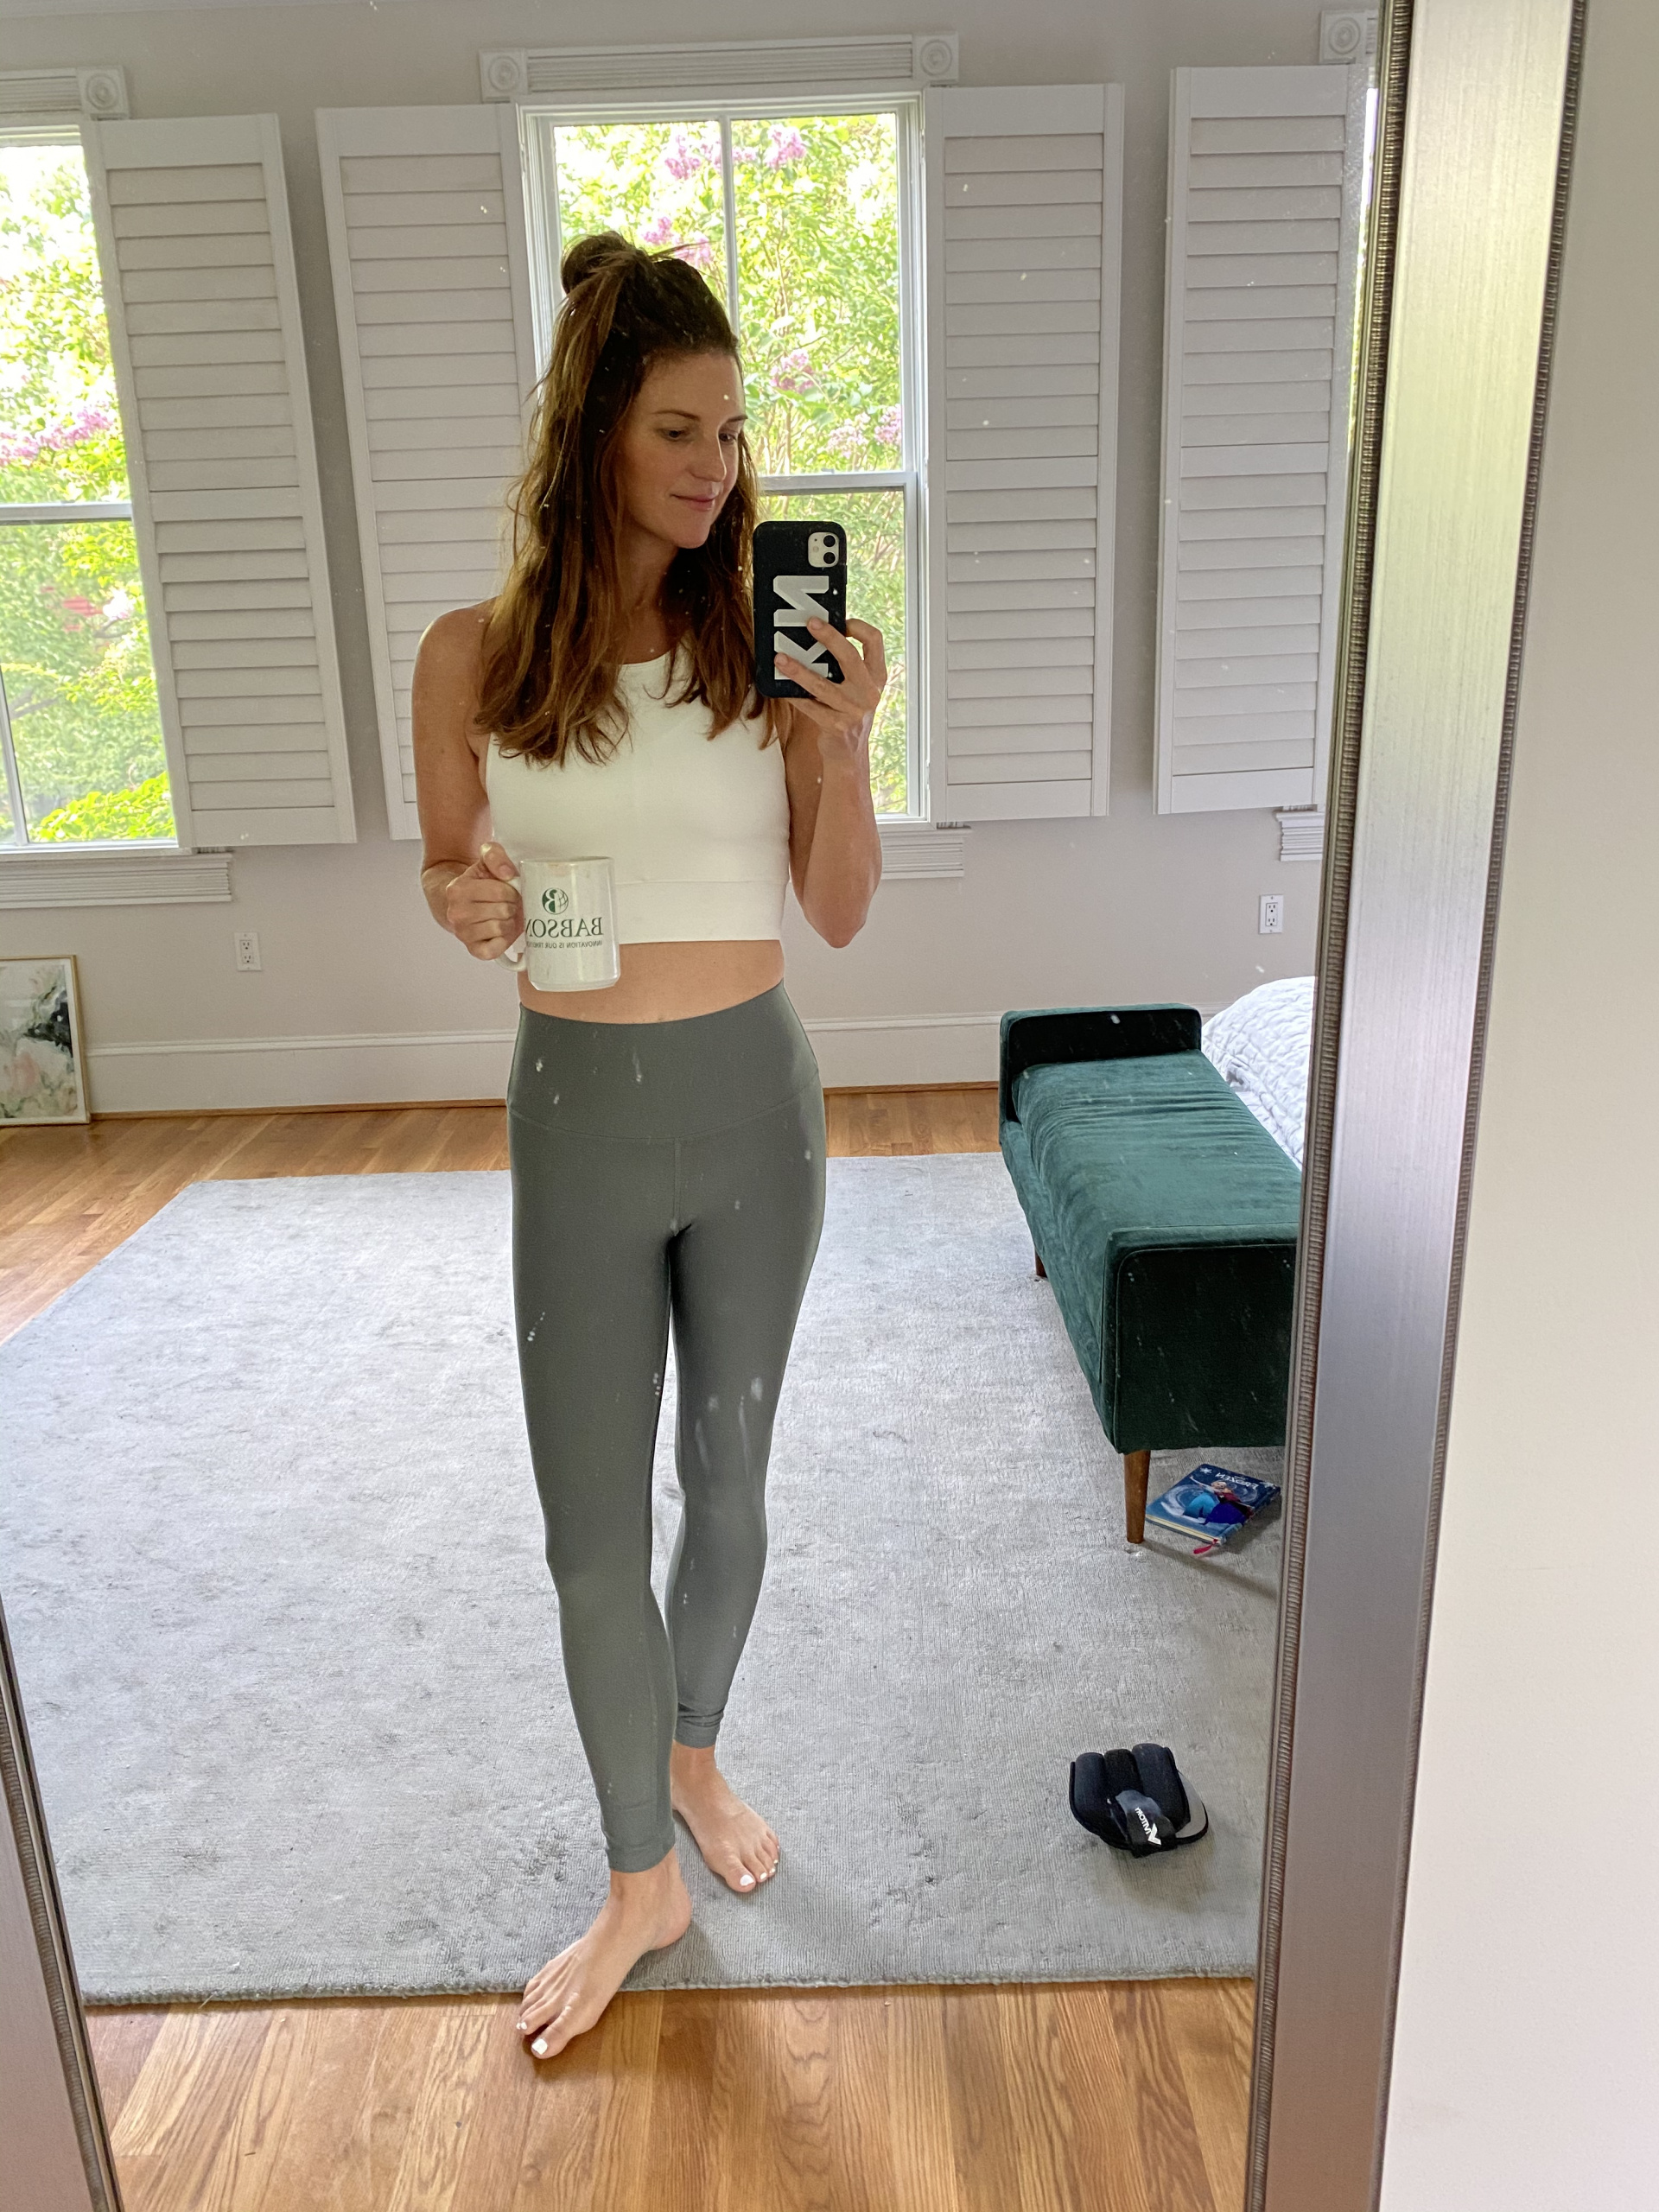 August recap, fitness outfits, barre instructor outfits, Alo leggings, workout style, IVL collection, finding beauty mom outfit ideas 